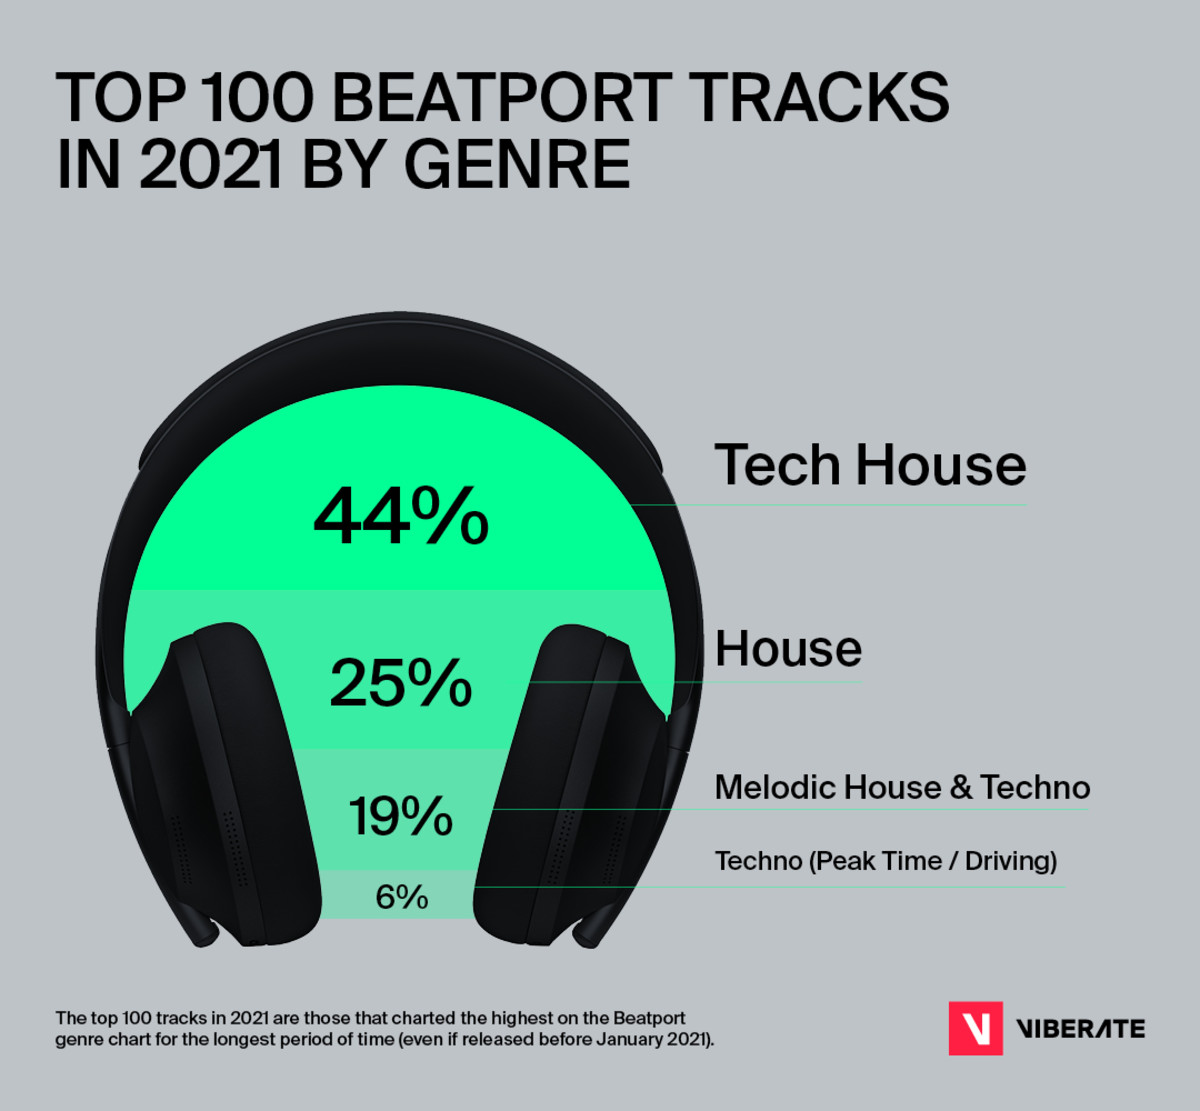 Tech House represented 44% of the top 100 Beatport tracks in 2021.